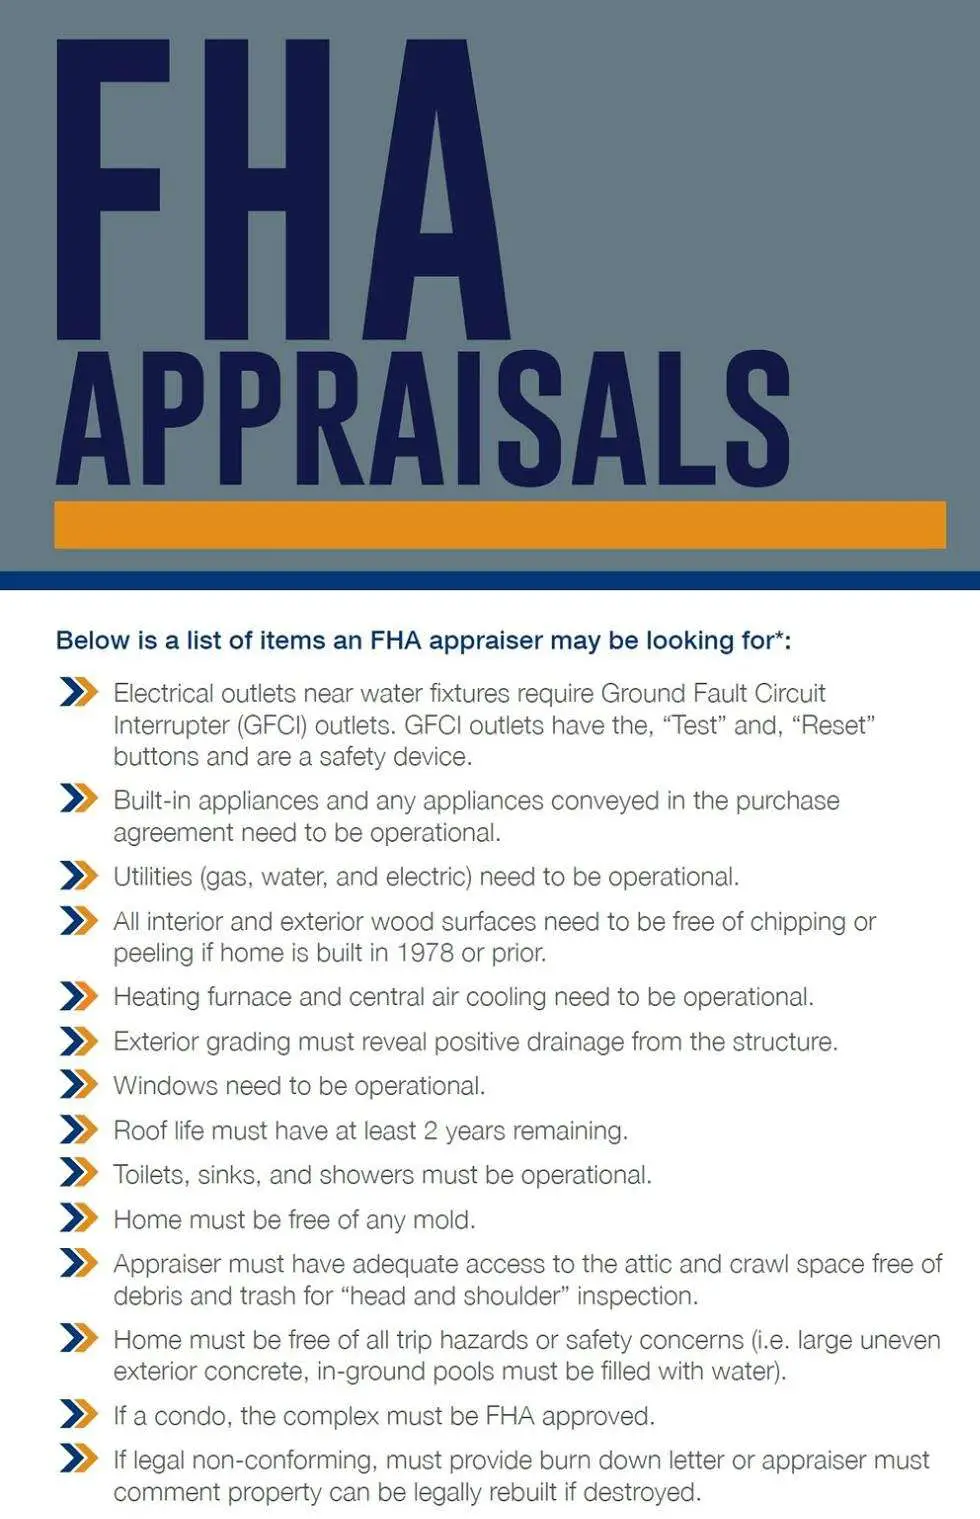 What are the FHA appraisal requirements?